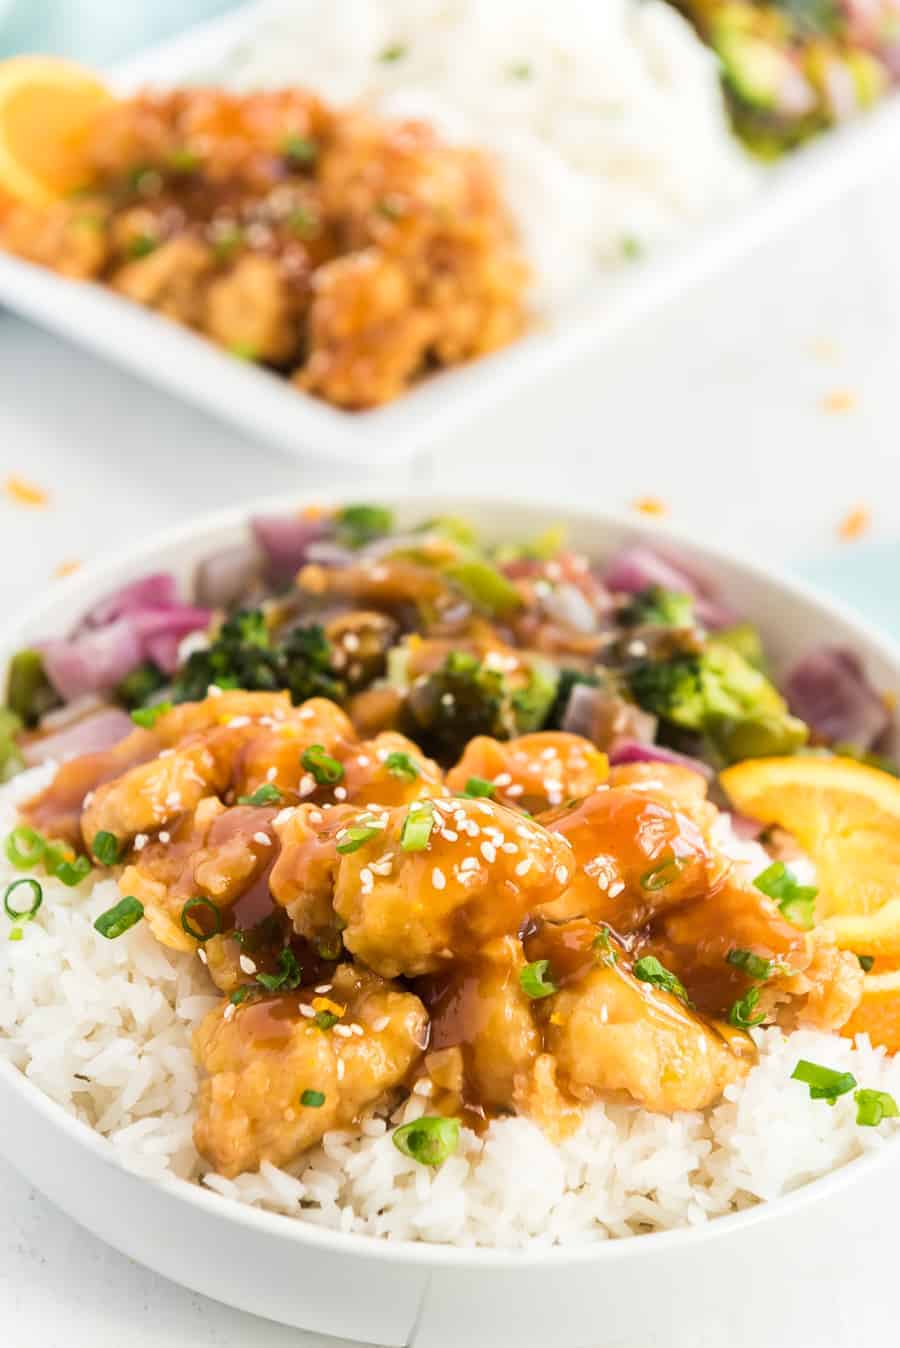 Is there a more satisfying meal than Orange Chicken with Stir-Fry Veggies? I think not... With the best blend of zest, tang, and crunch, this dinner will be a favorite of your family's to make over and over again.